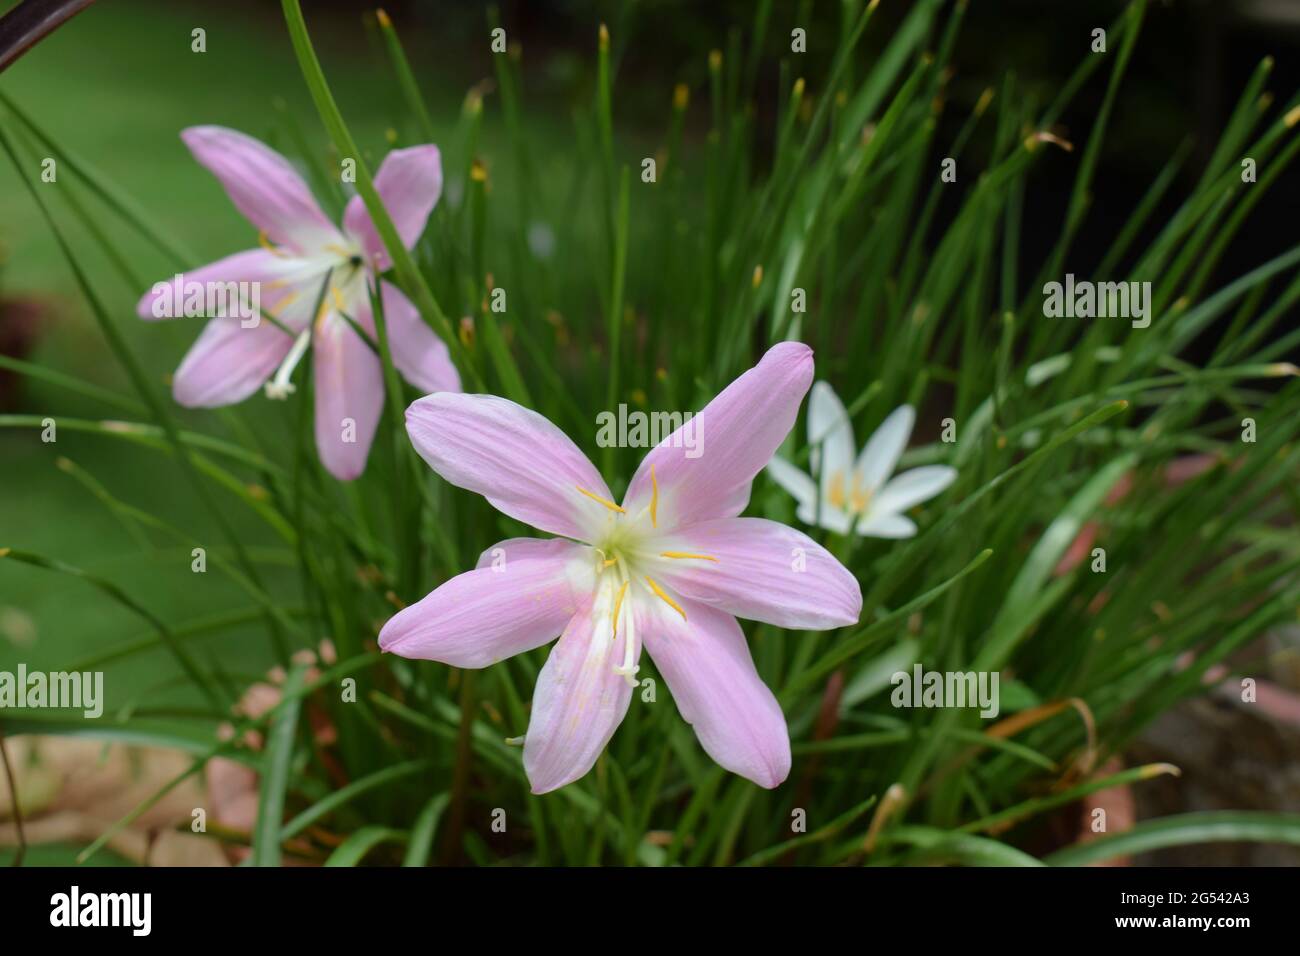 Rain lily flower in pink color and white color in back. Scientifically known as Zephyranthes carinata. Indian flowering plants Stock Photo